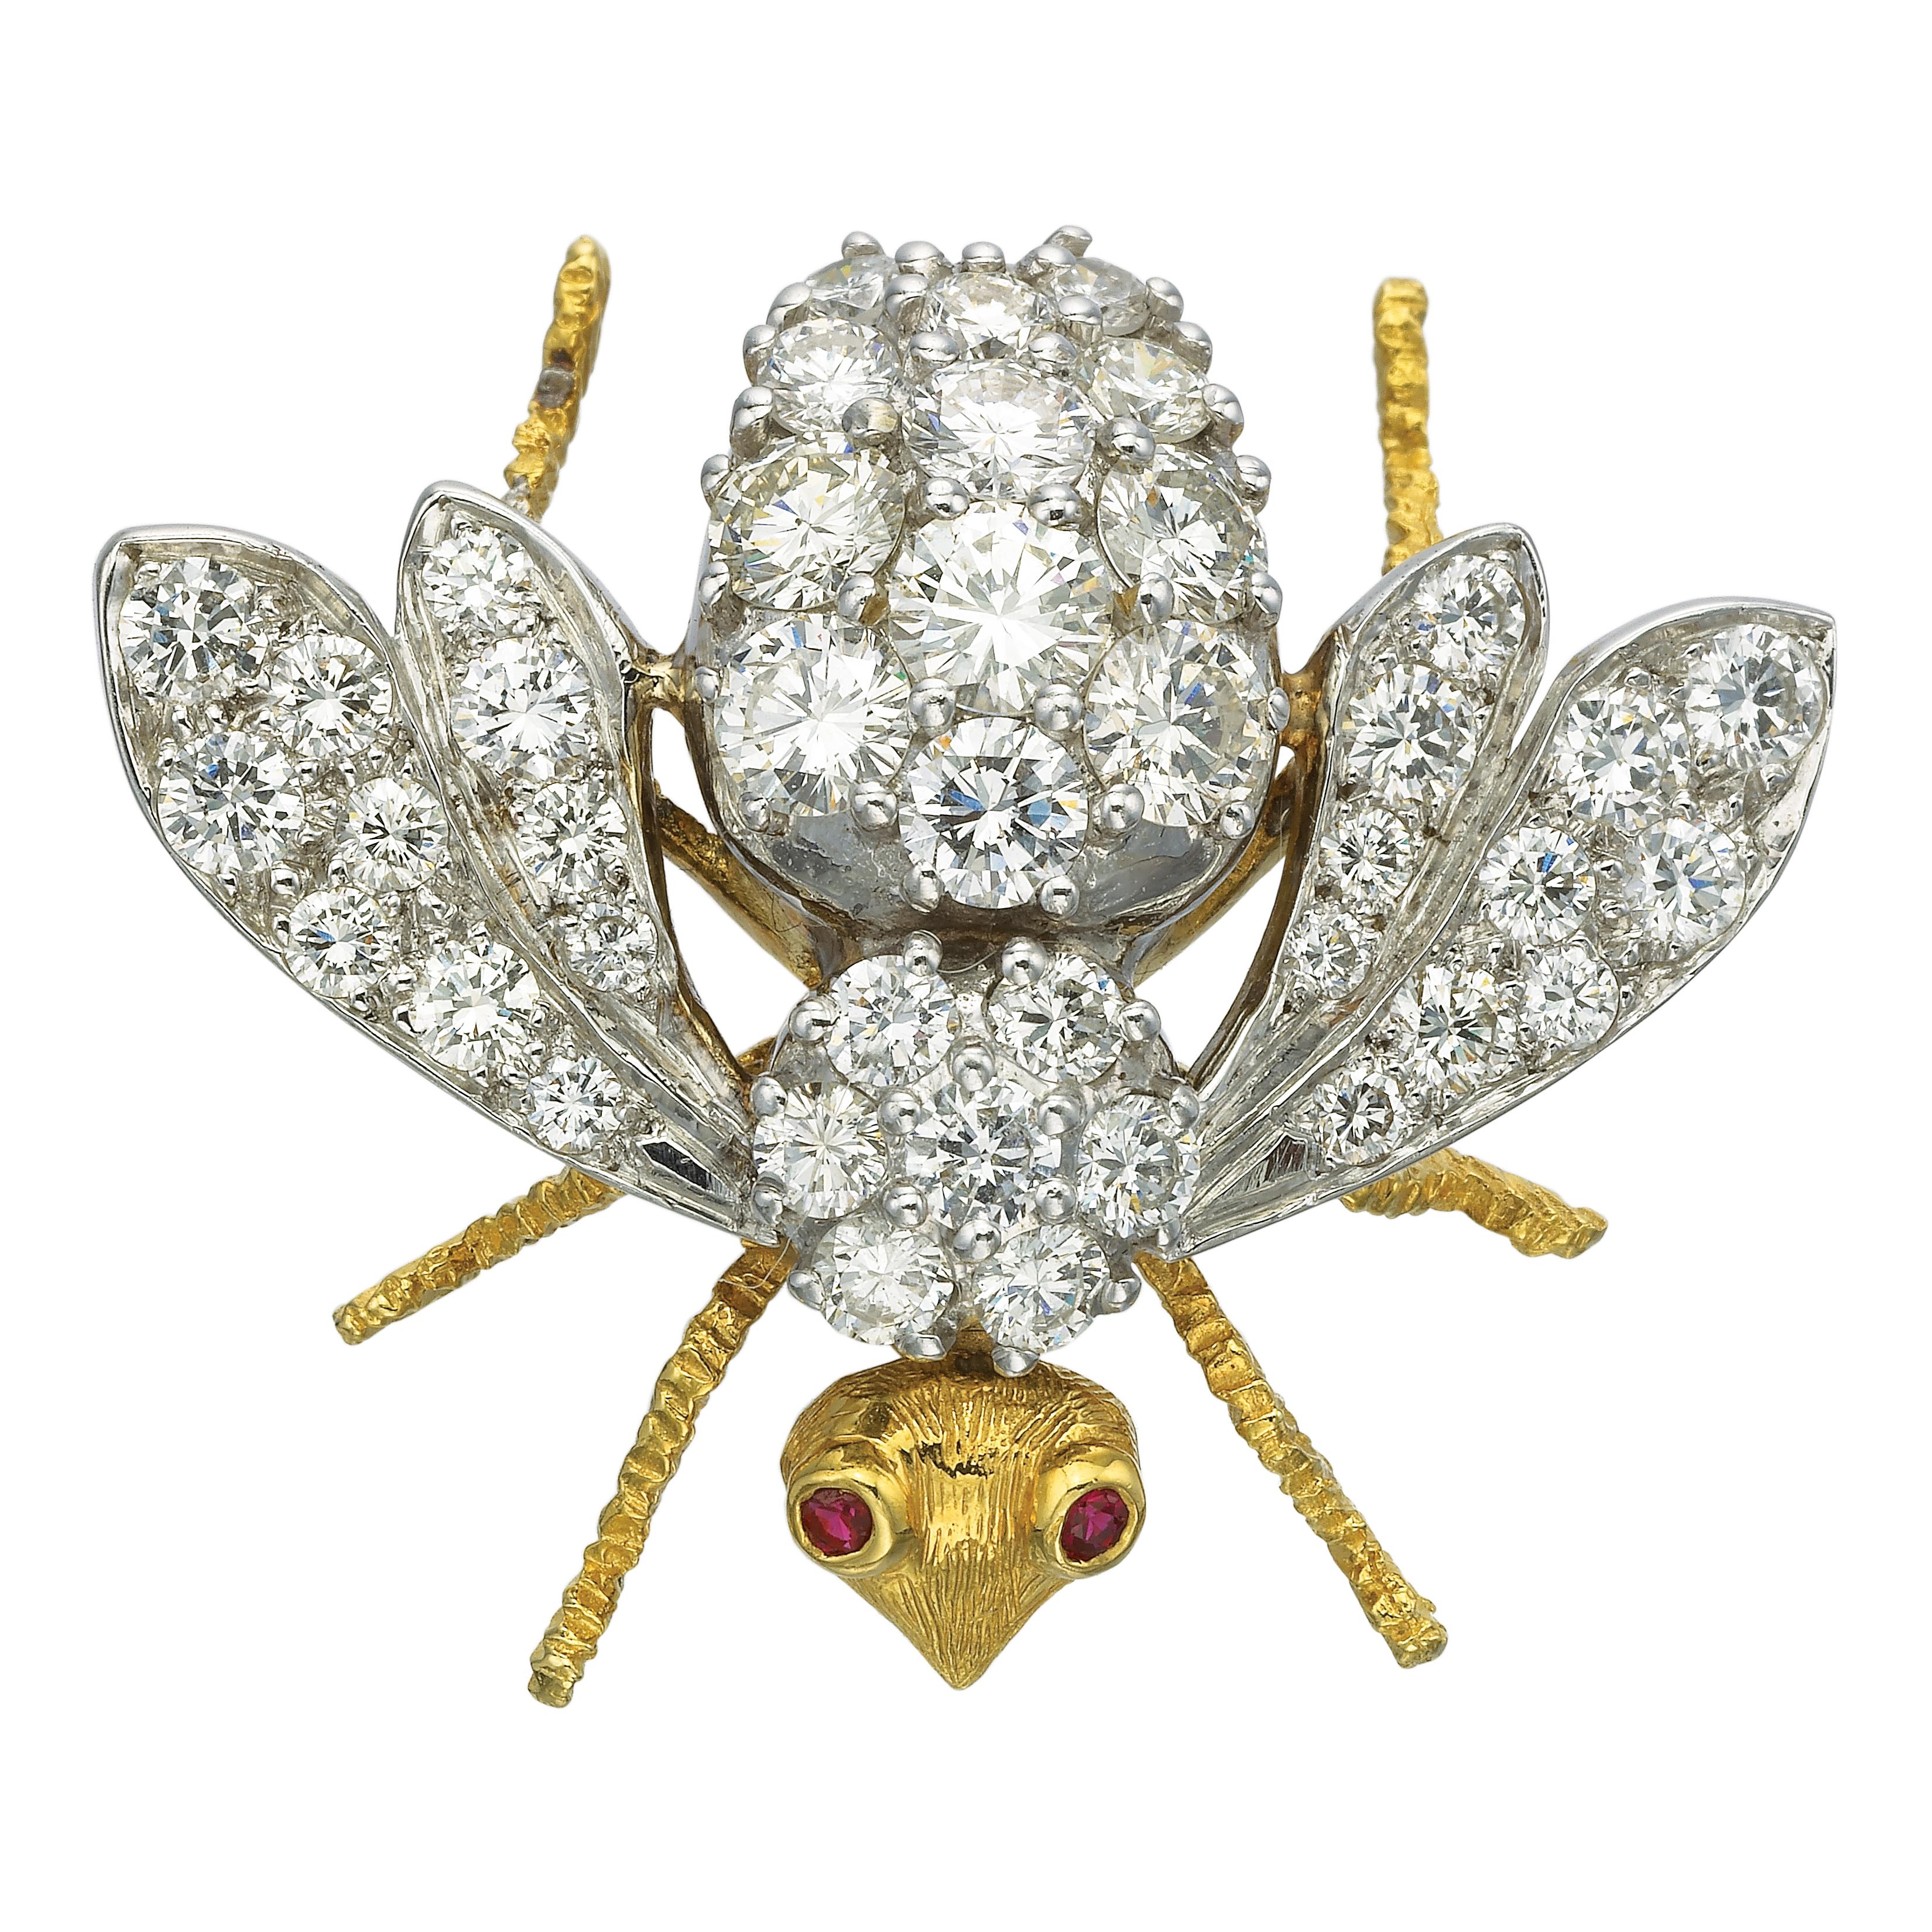 Scintillating sparkles of 5.00 carats diamonds buzz into view on this Herbert Rosenthal masterpiece. Two graceful ruby eyes are set in an 18 karat yellow gold bee brooch. The body and wings are 18 carat white gold pave' set with 41 round brilliant